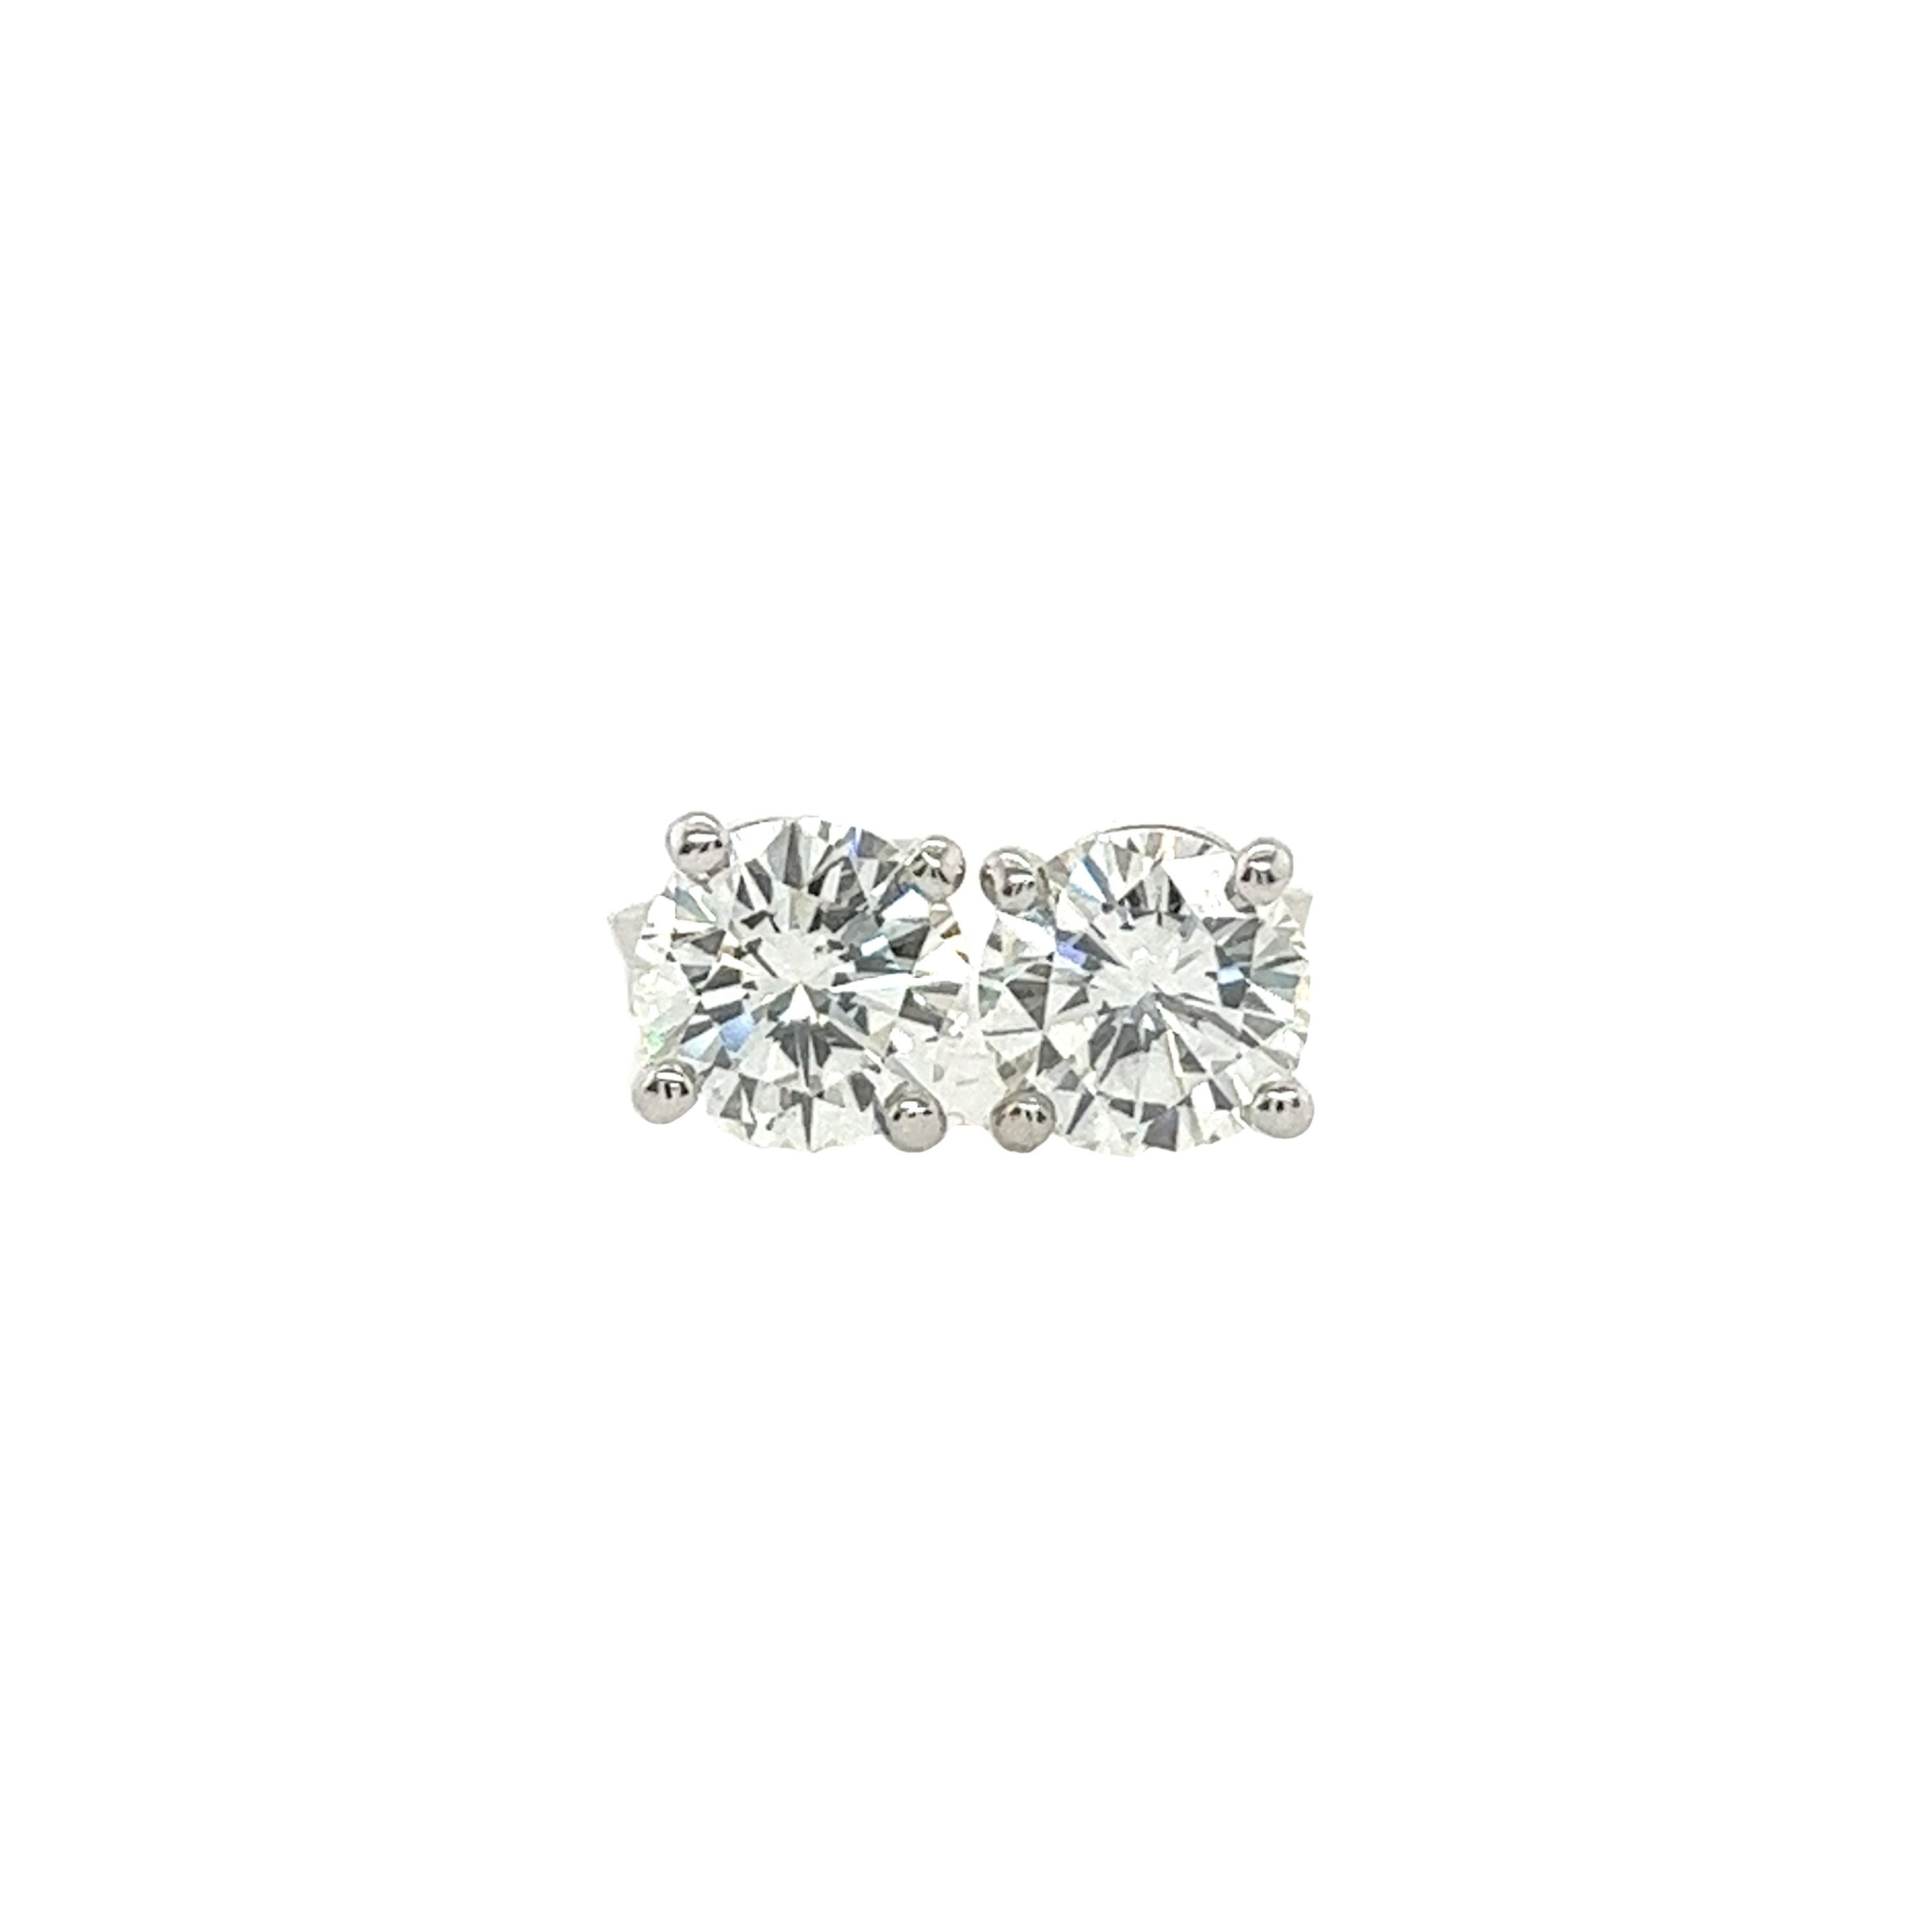 18ct White Gold Diamond Stud Earrings, Set With 2.06ct Natural Diamonds For Sale 2